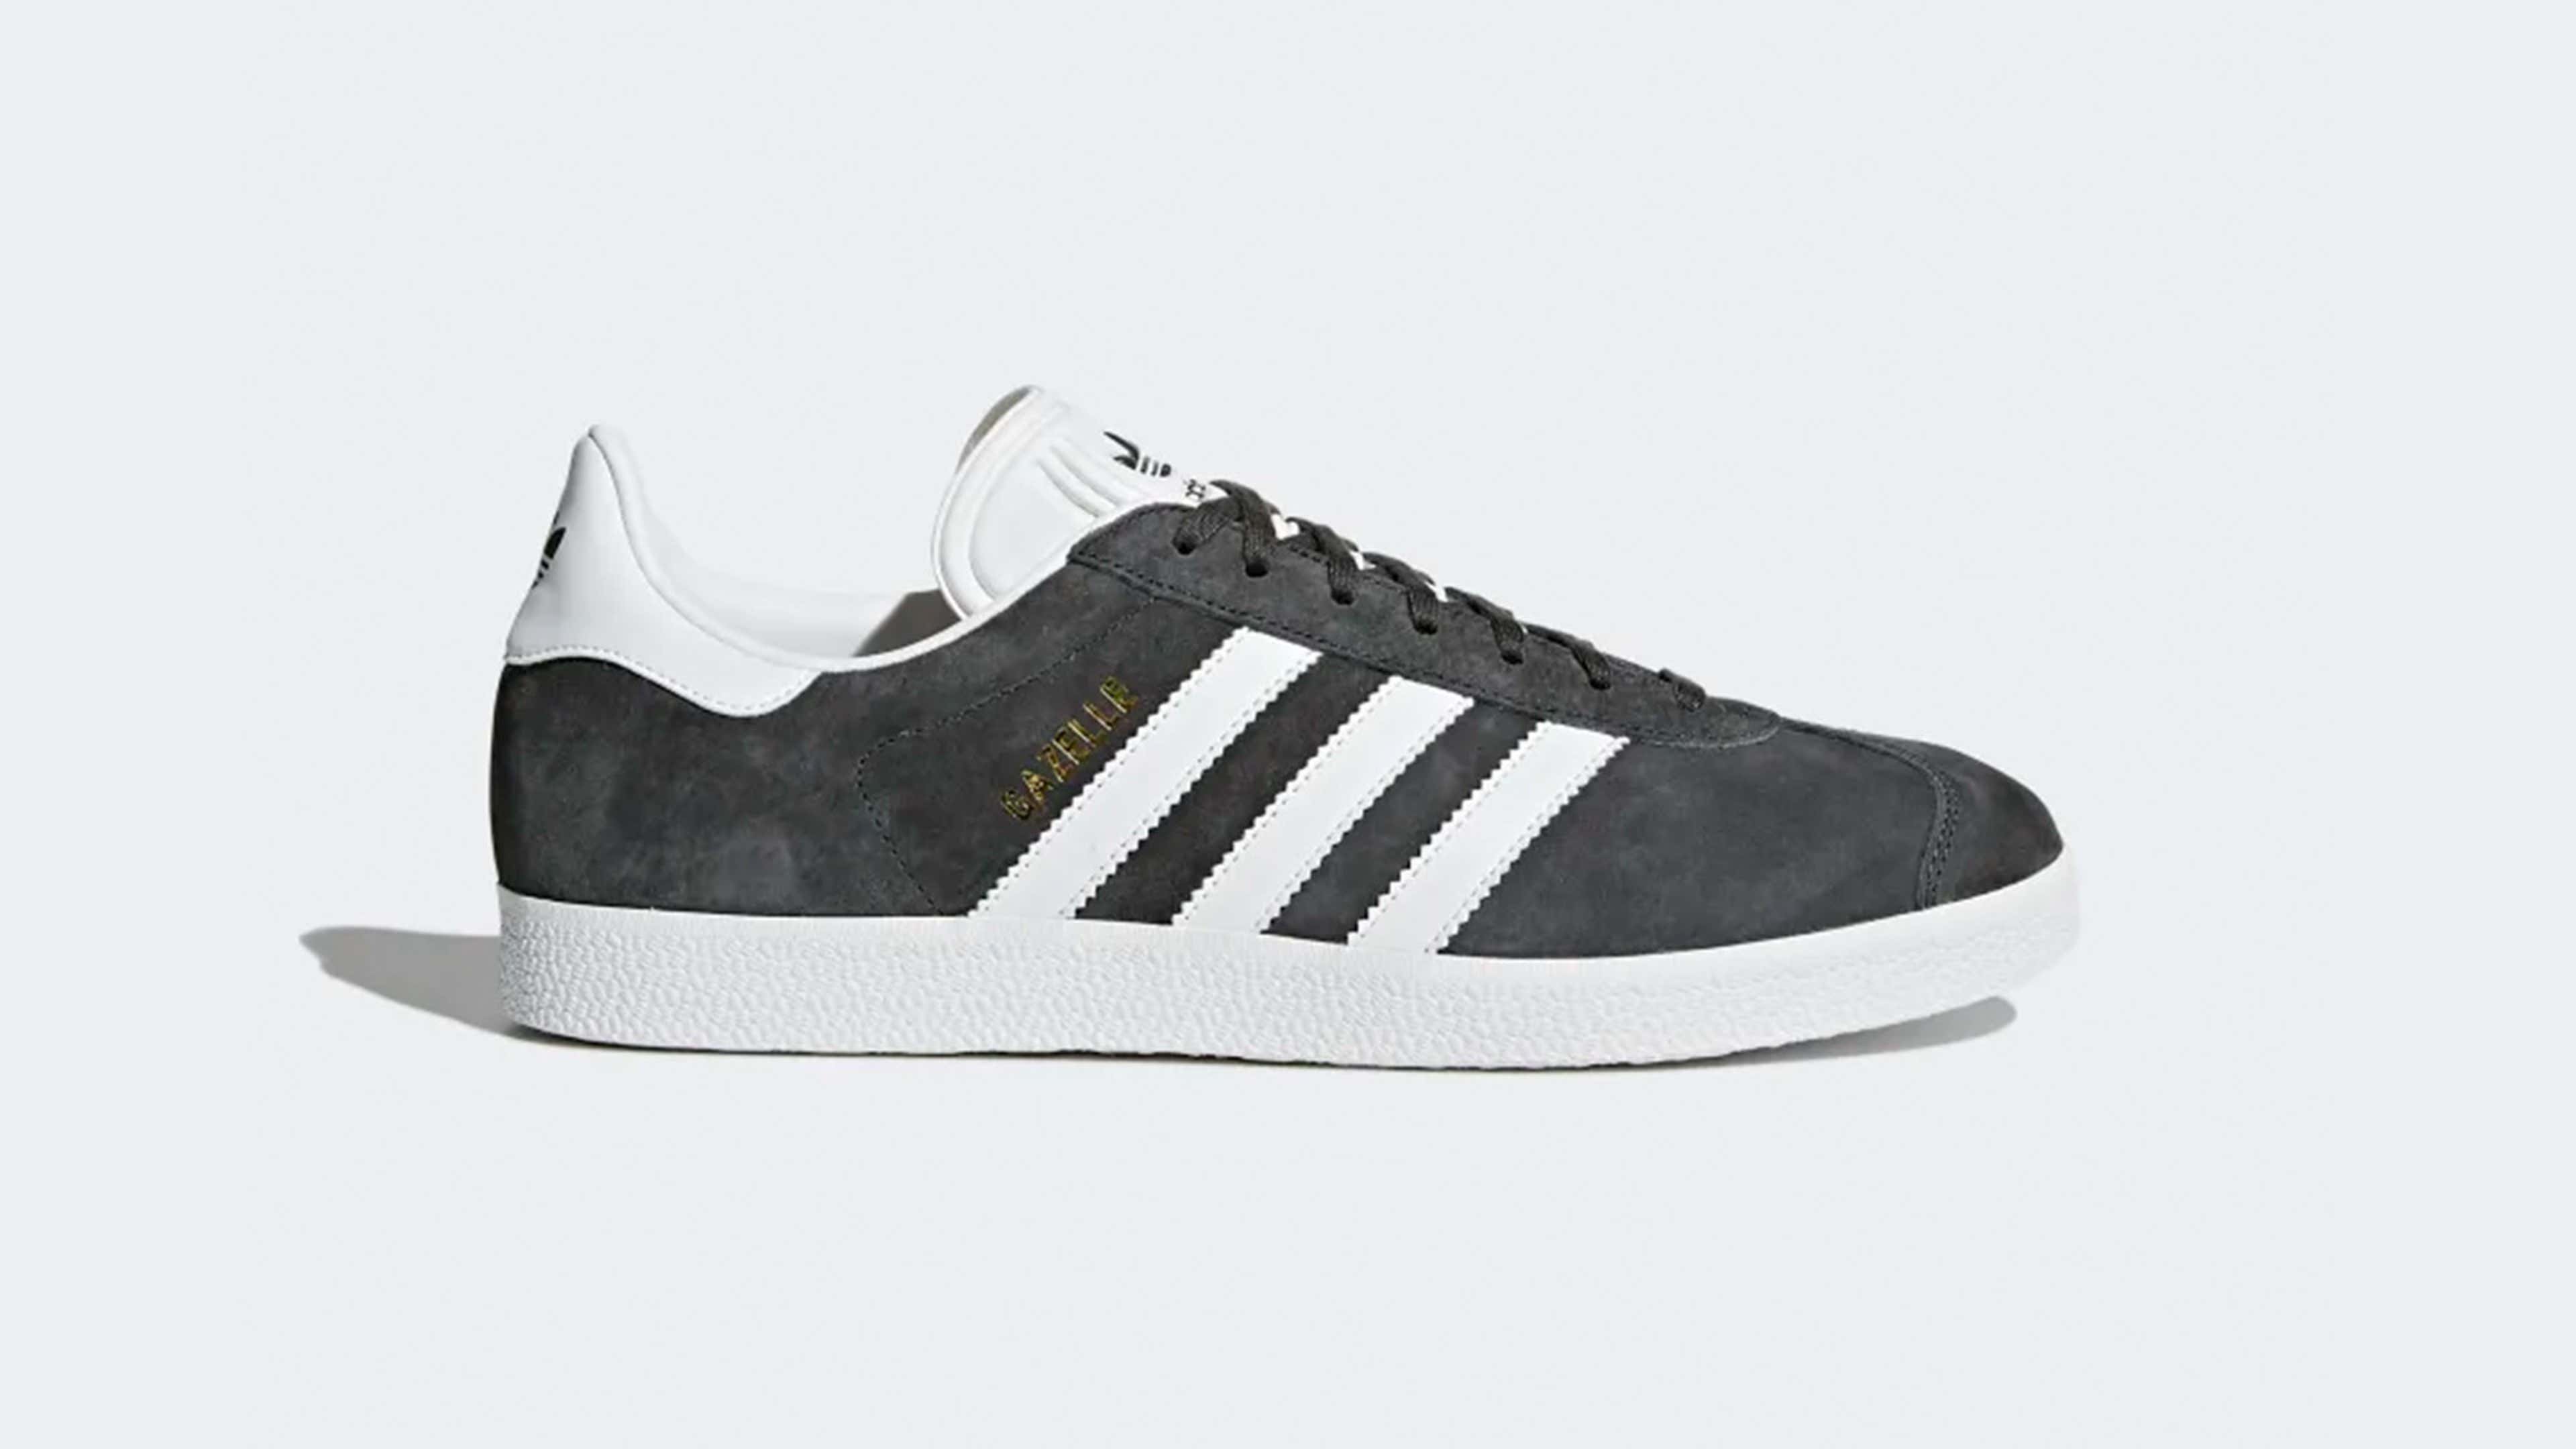 Psicologicamente moral ácido The best men's adidas trainers you can buy in 2023 | Goal.com English Kuwait